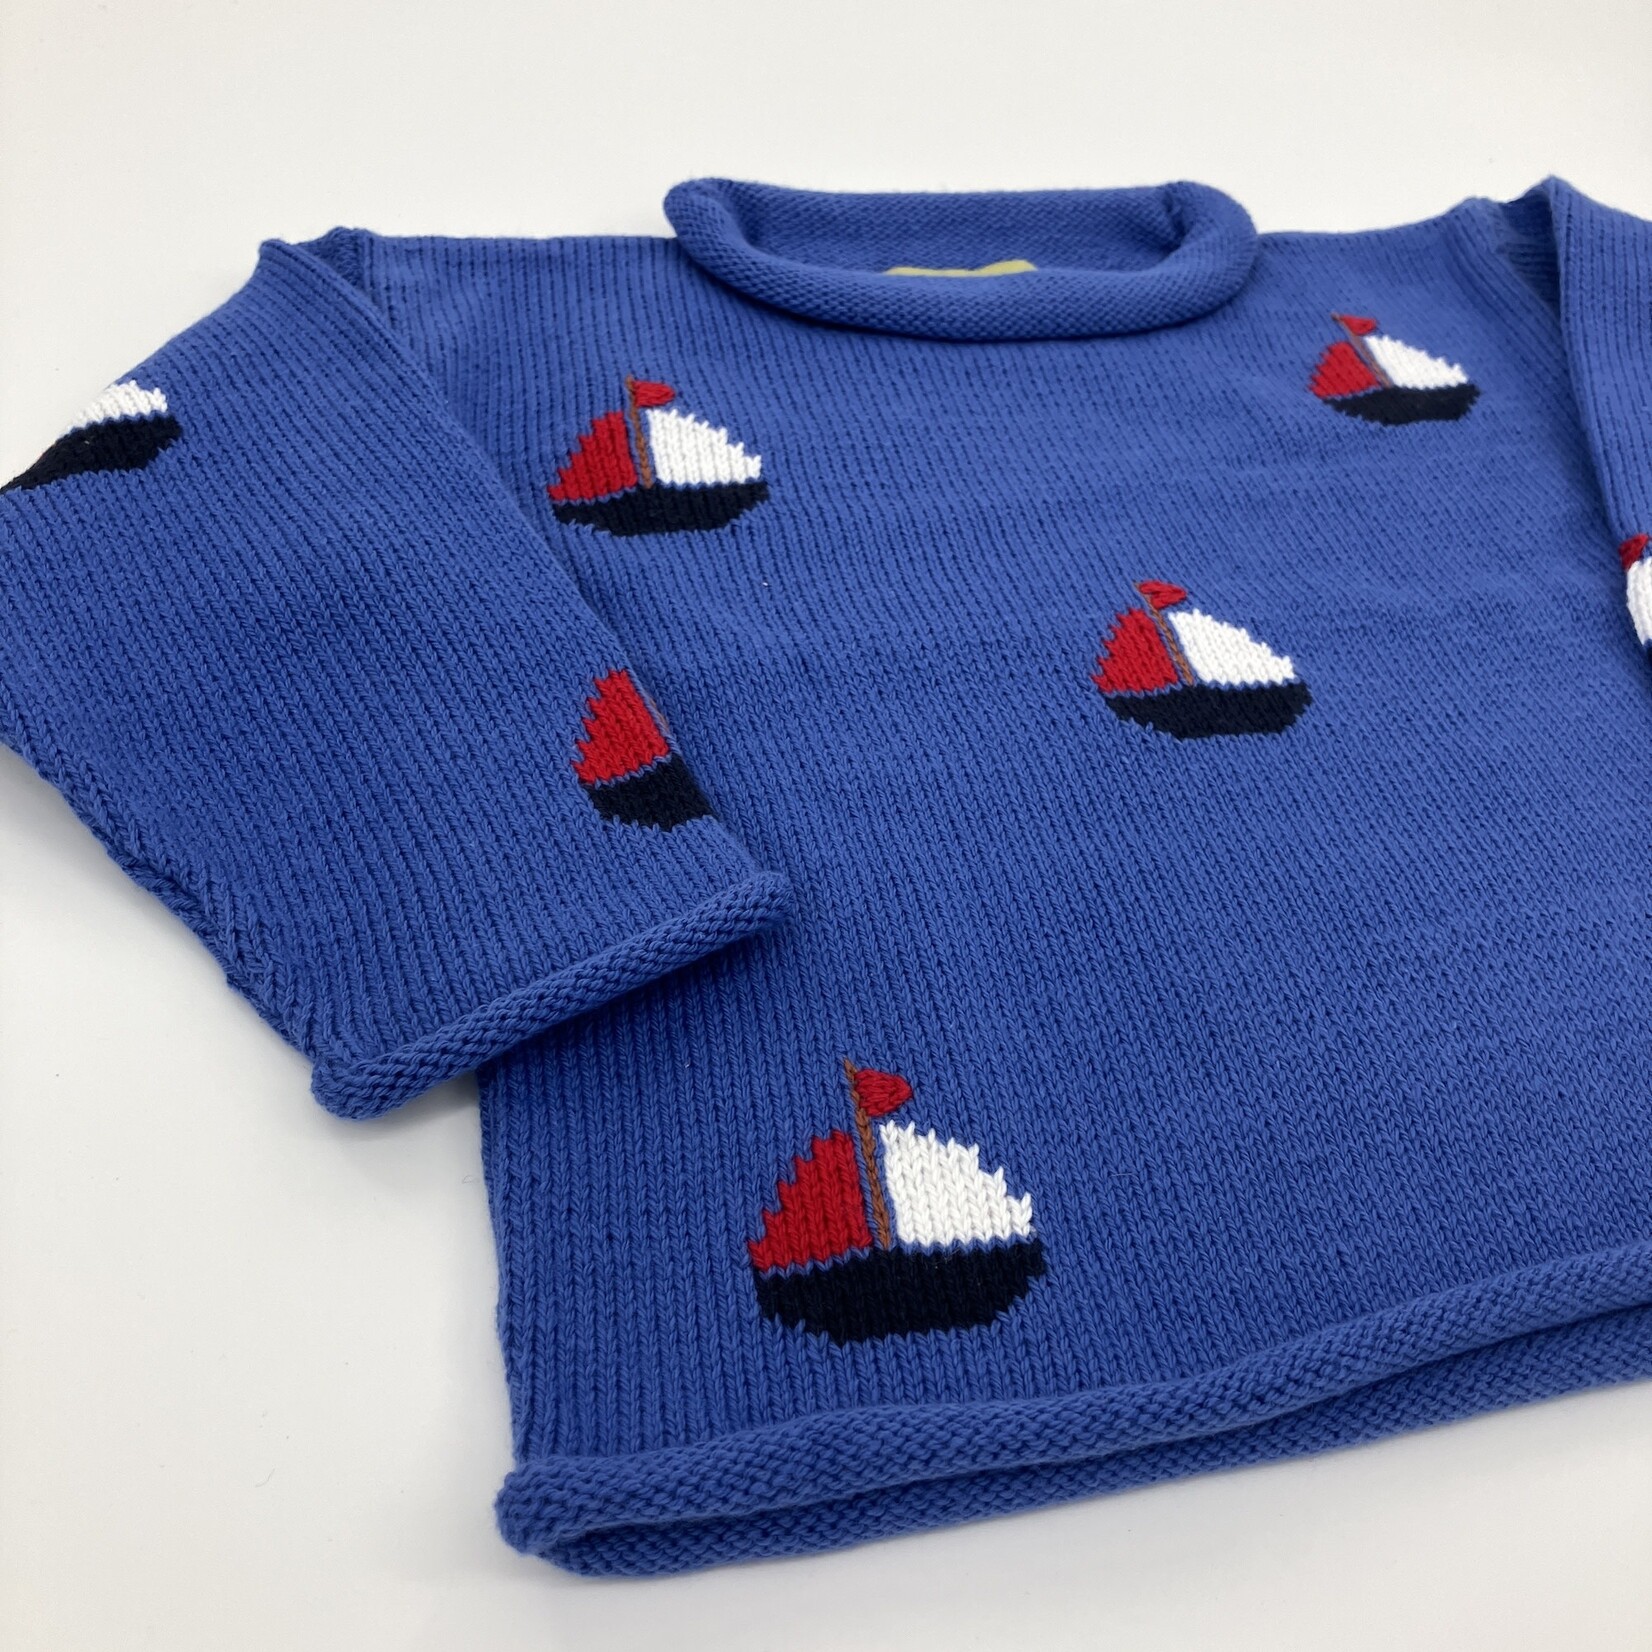 ACVISA/CLAVER Blue Sweater w/ Red Sailboat